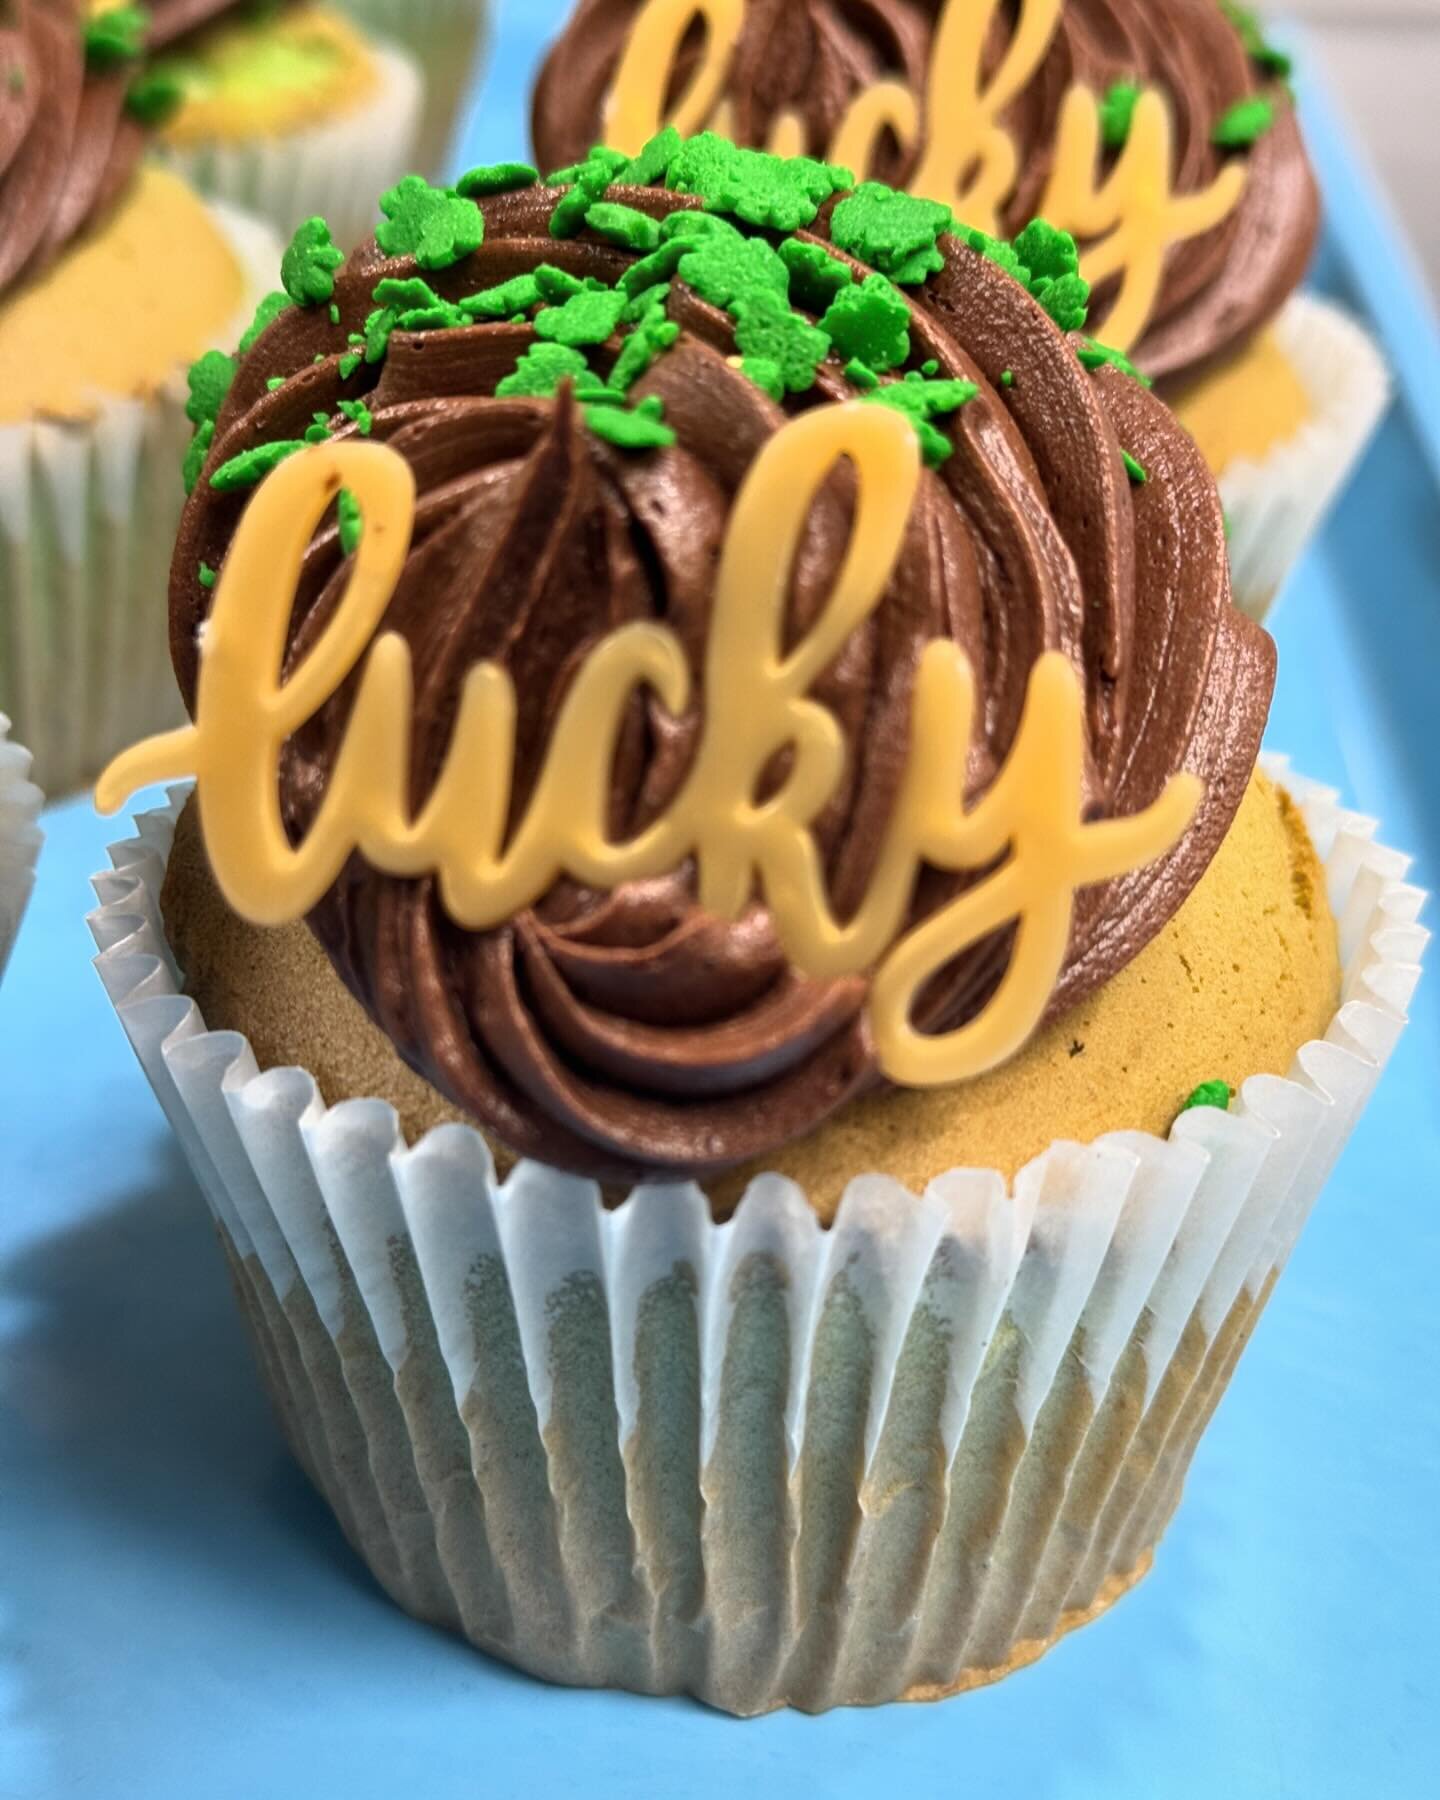 #lucky  Chocolate mint #cupcake  starting today. #grasshopper